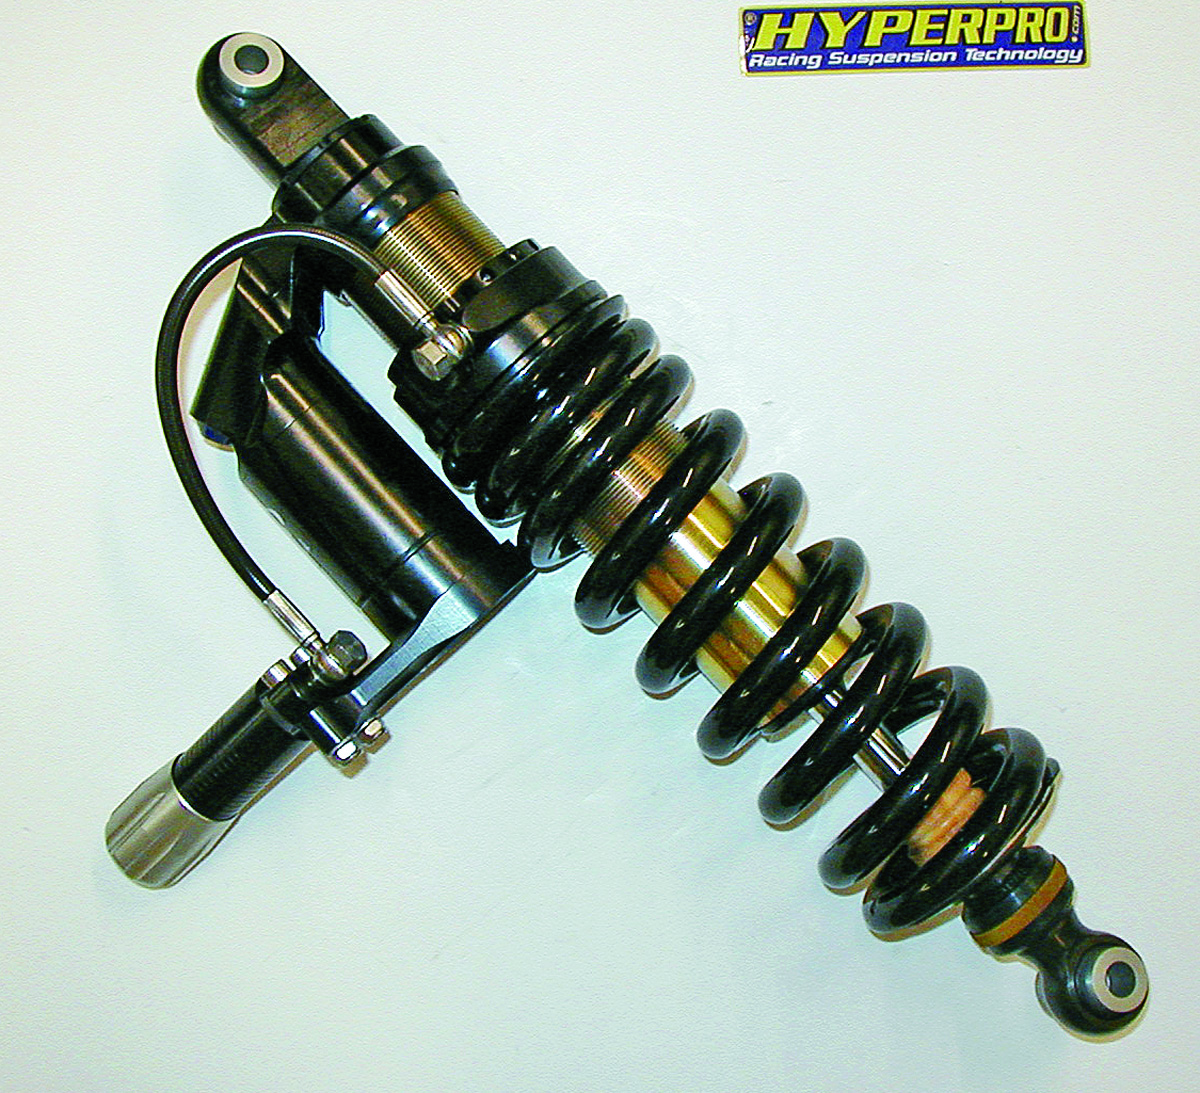 Hydraulic Shock Absorbers Review